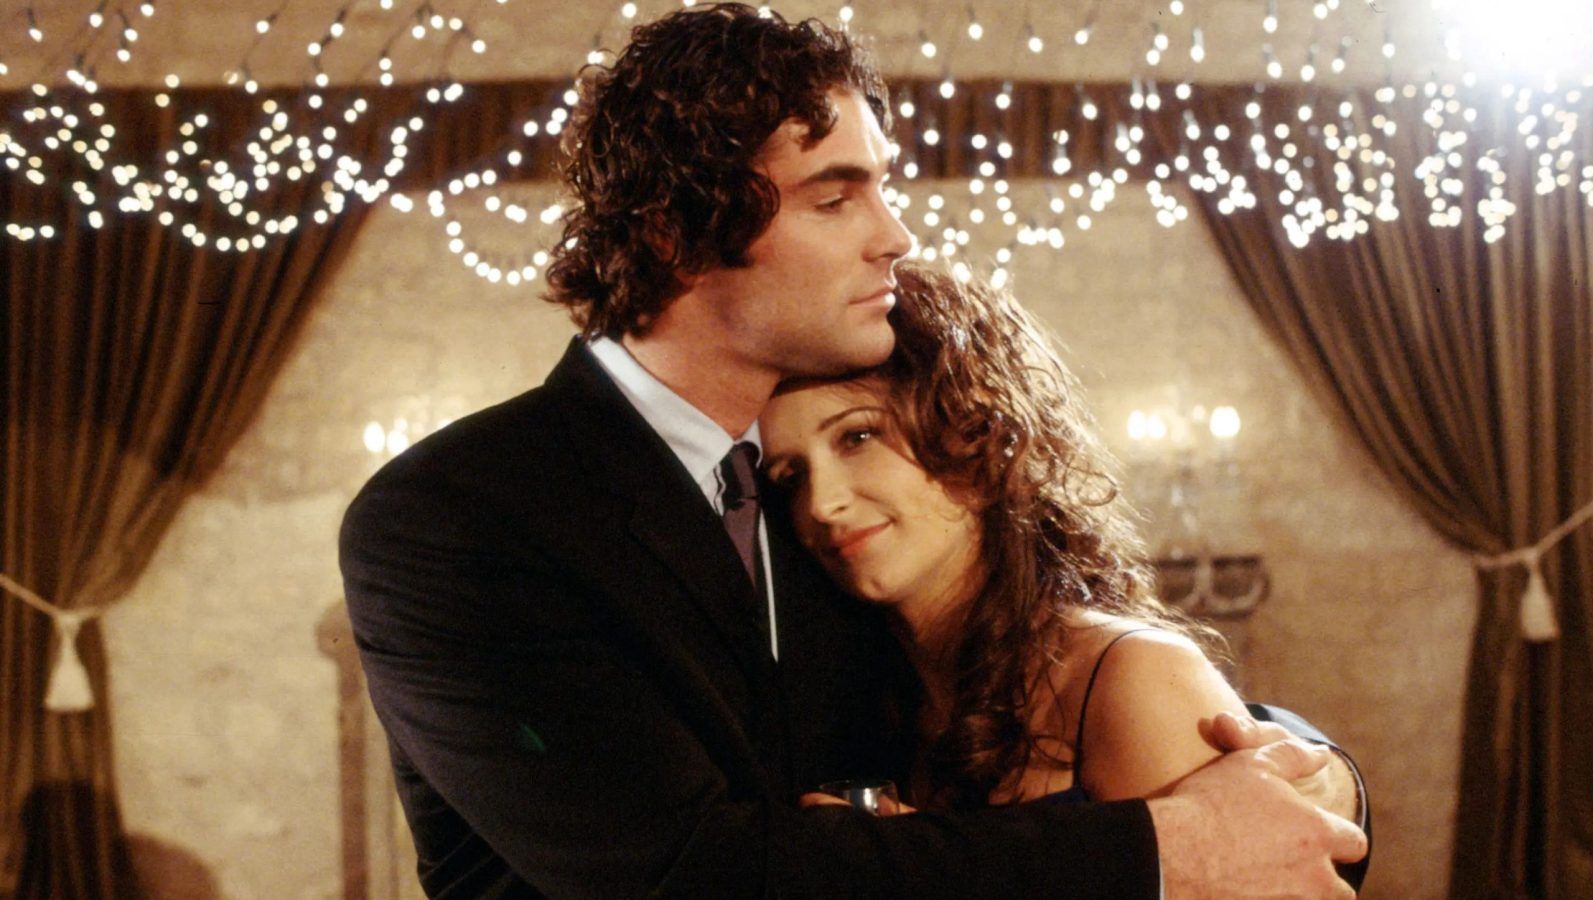 16 Amazing TV Shows for Couples